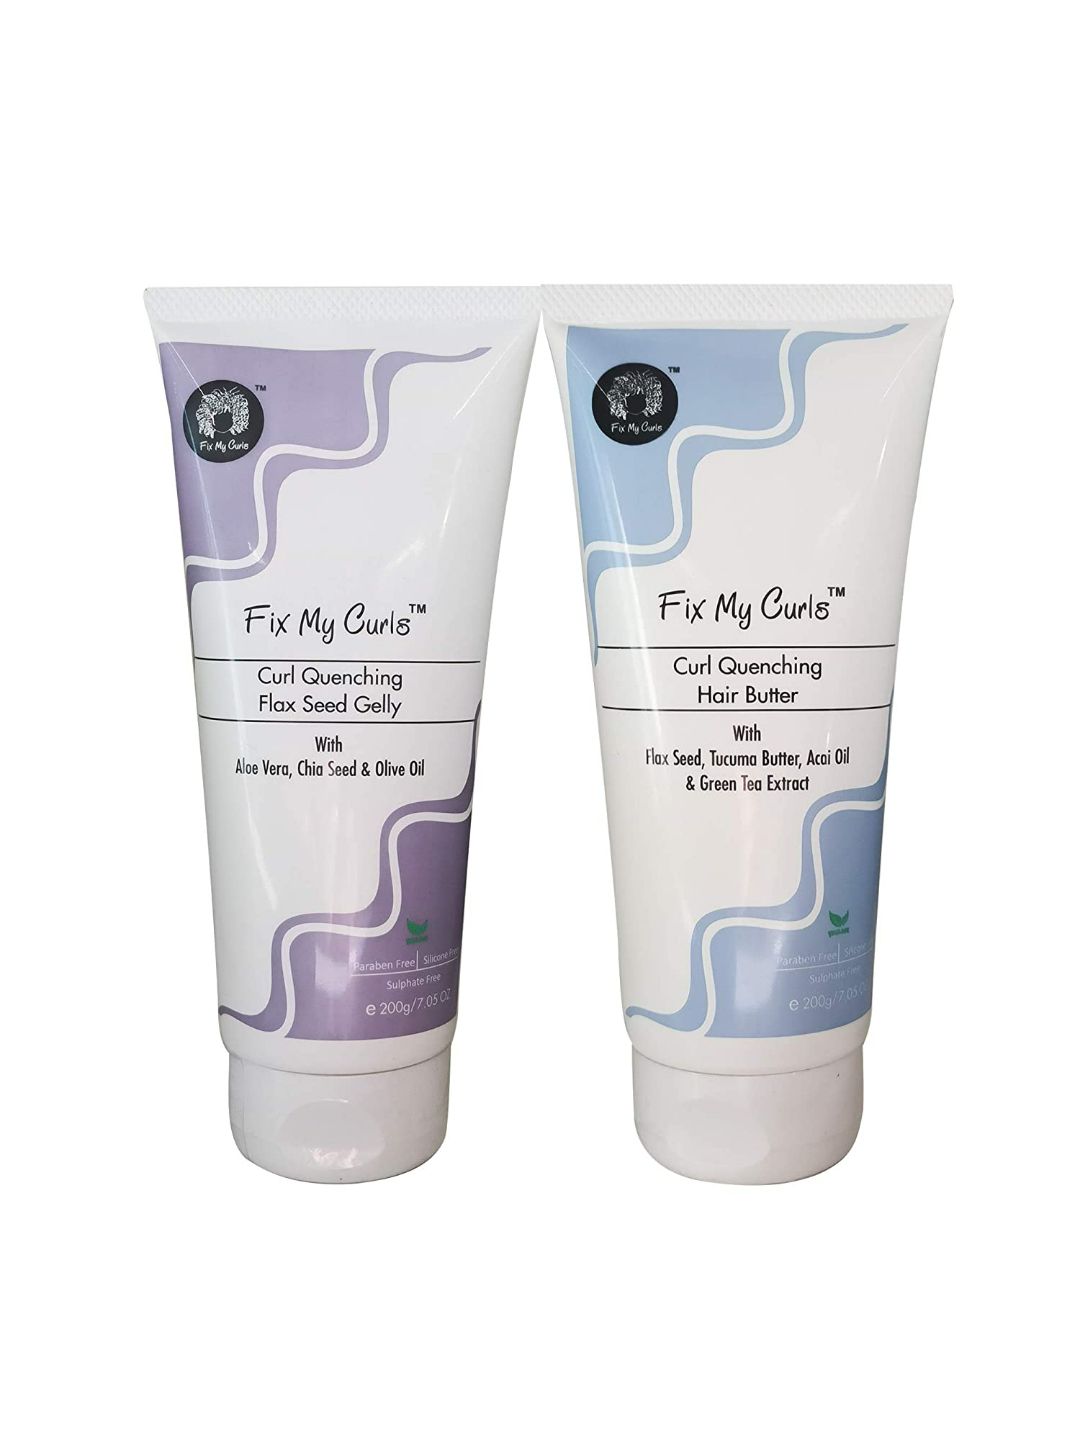 Fix My Curls Set of 2 Moisture Styling Curl Quenching Creame For Curly And Wavy Hair Price in India